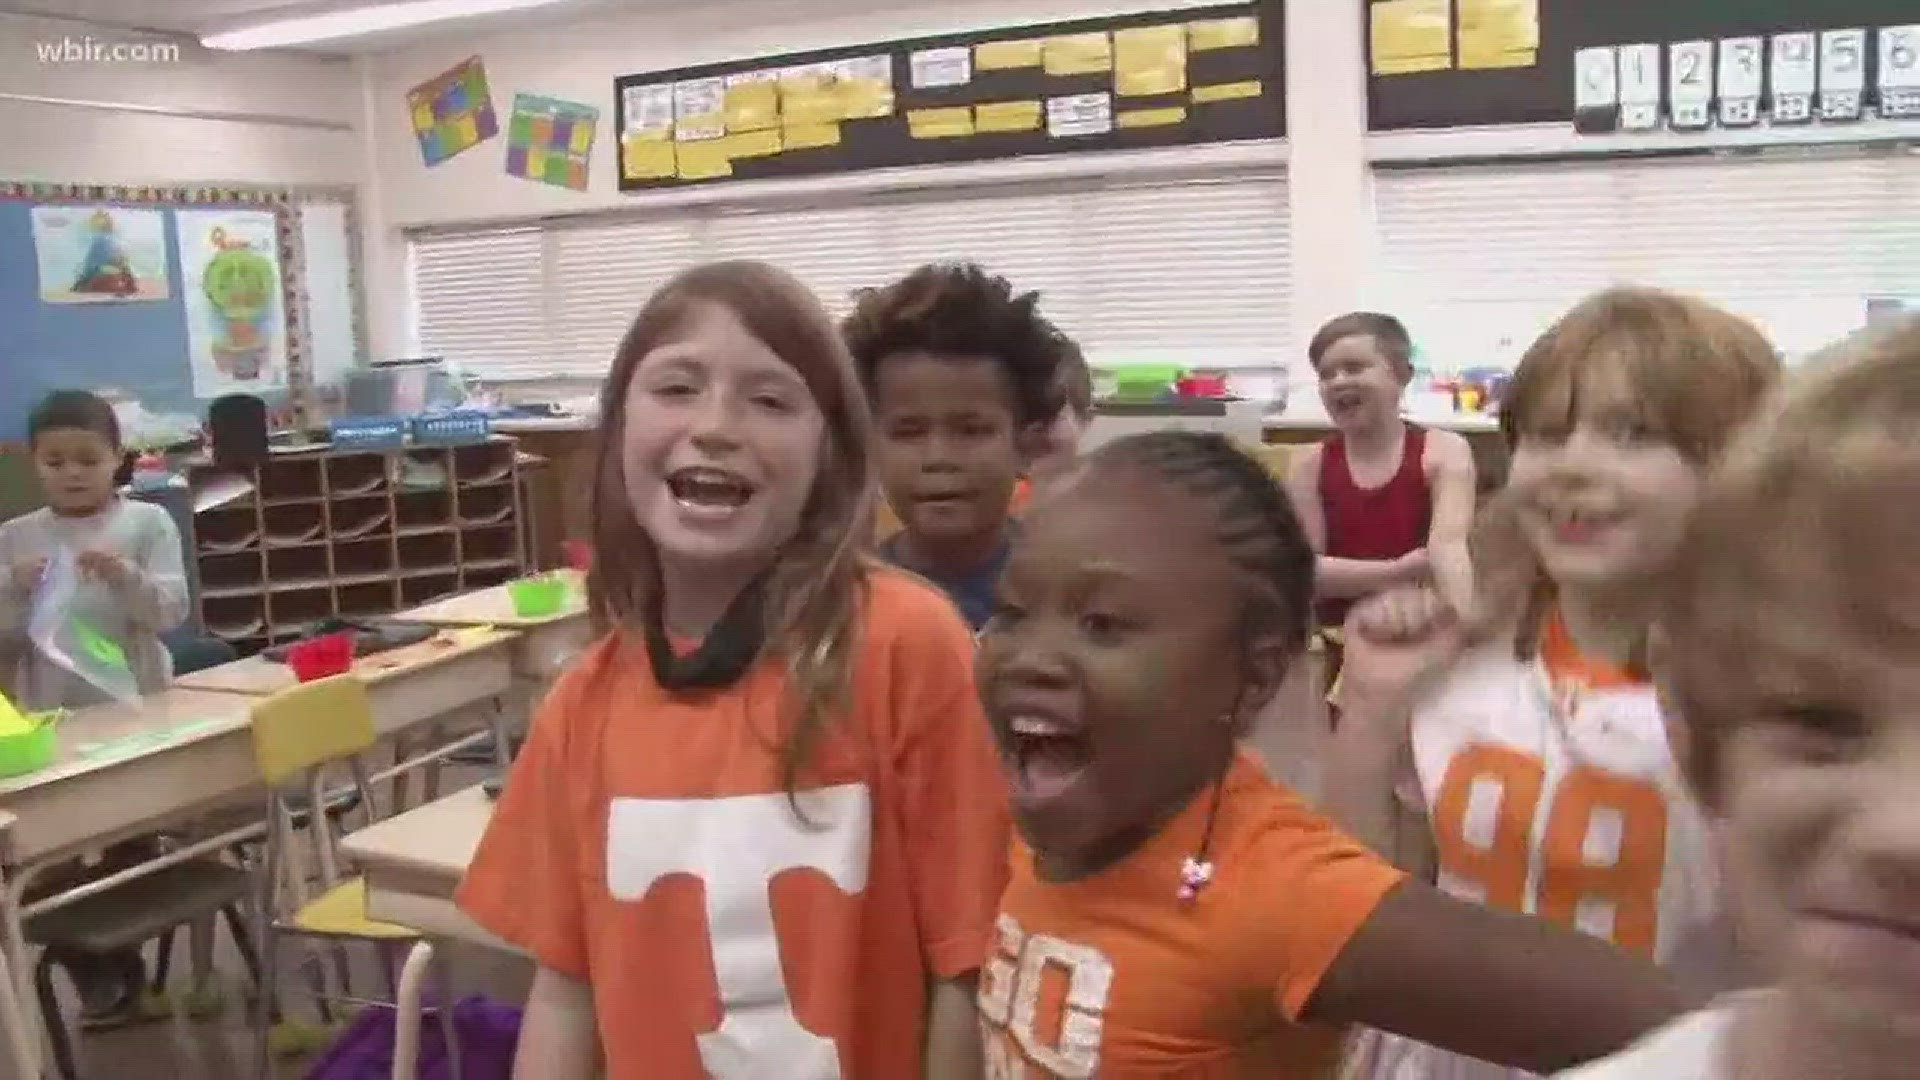 Nov. 3, 2017: A group of Knoxville elementary school students will get to see their first Vols game through the help of 250 donated tickets.